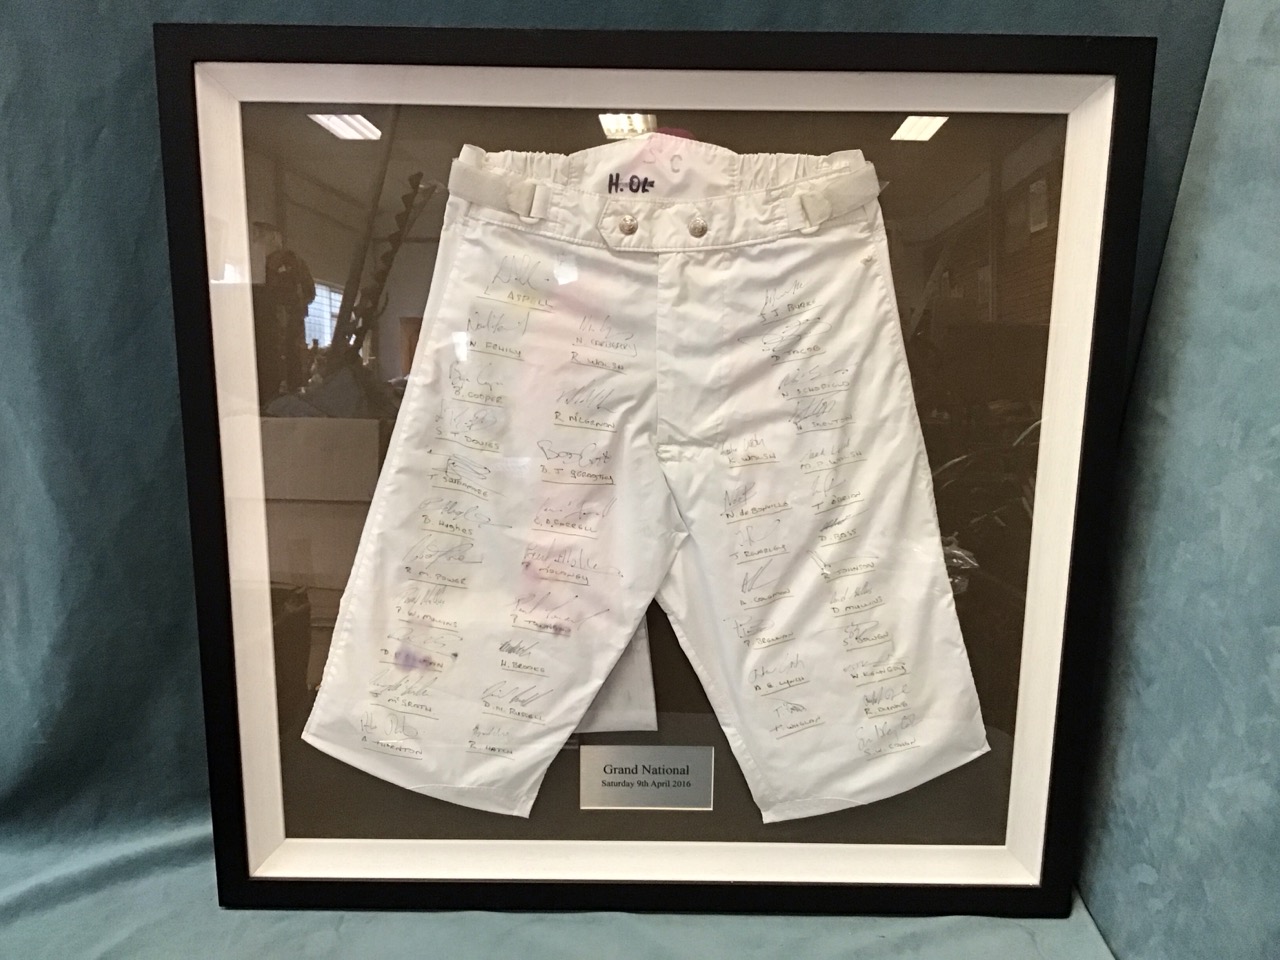 A pair of riding breeches worn by Sam Whaley Cohen in the 2016 Grand National, signed by the